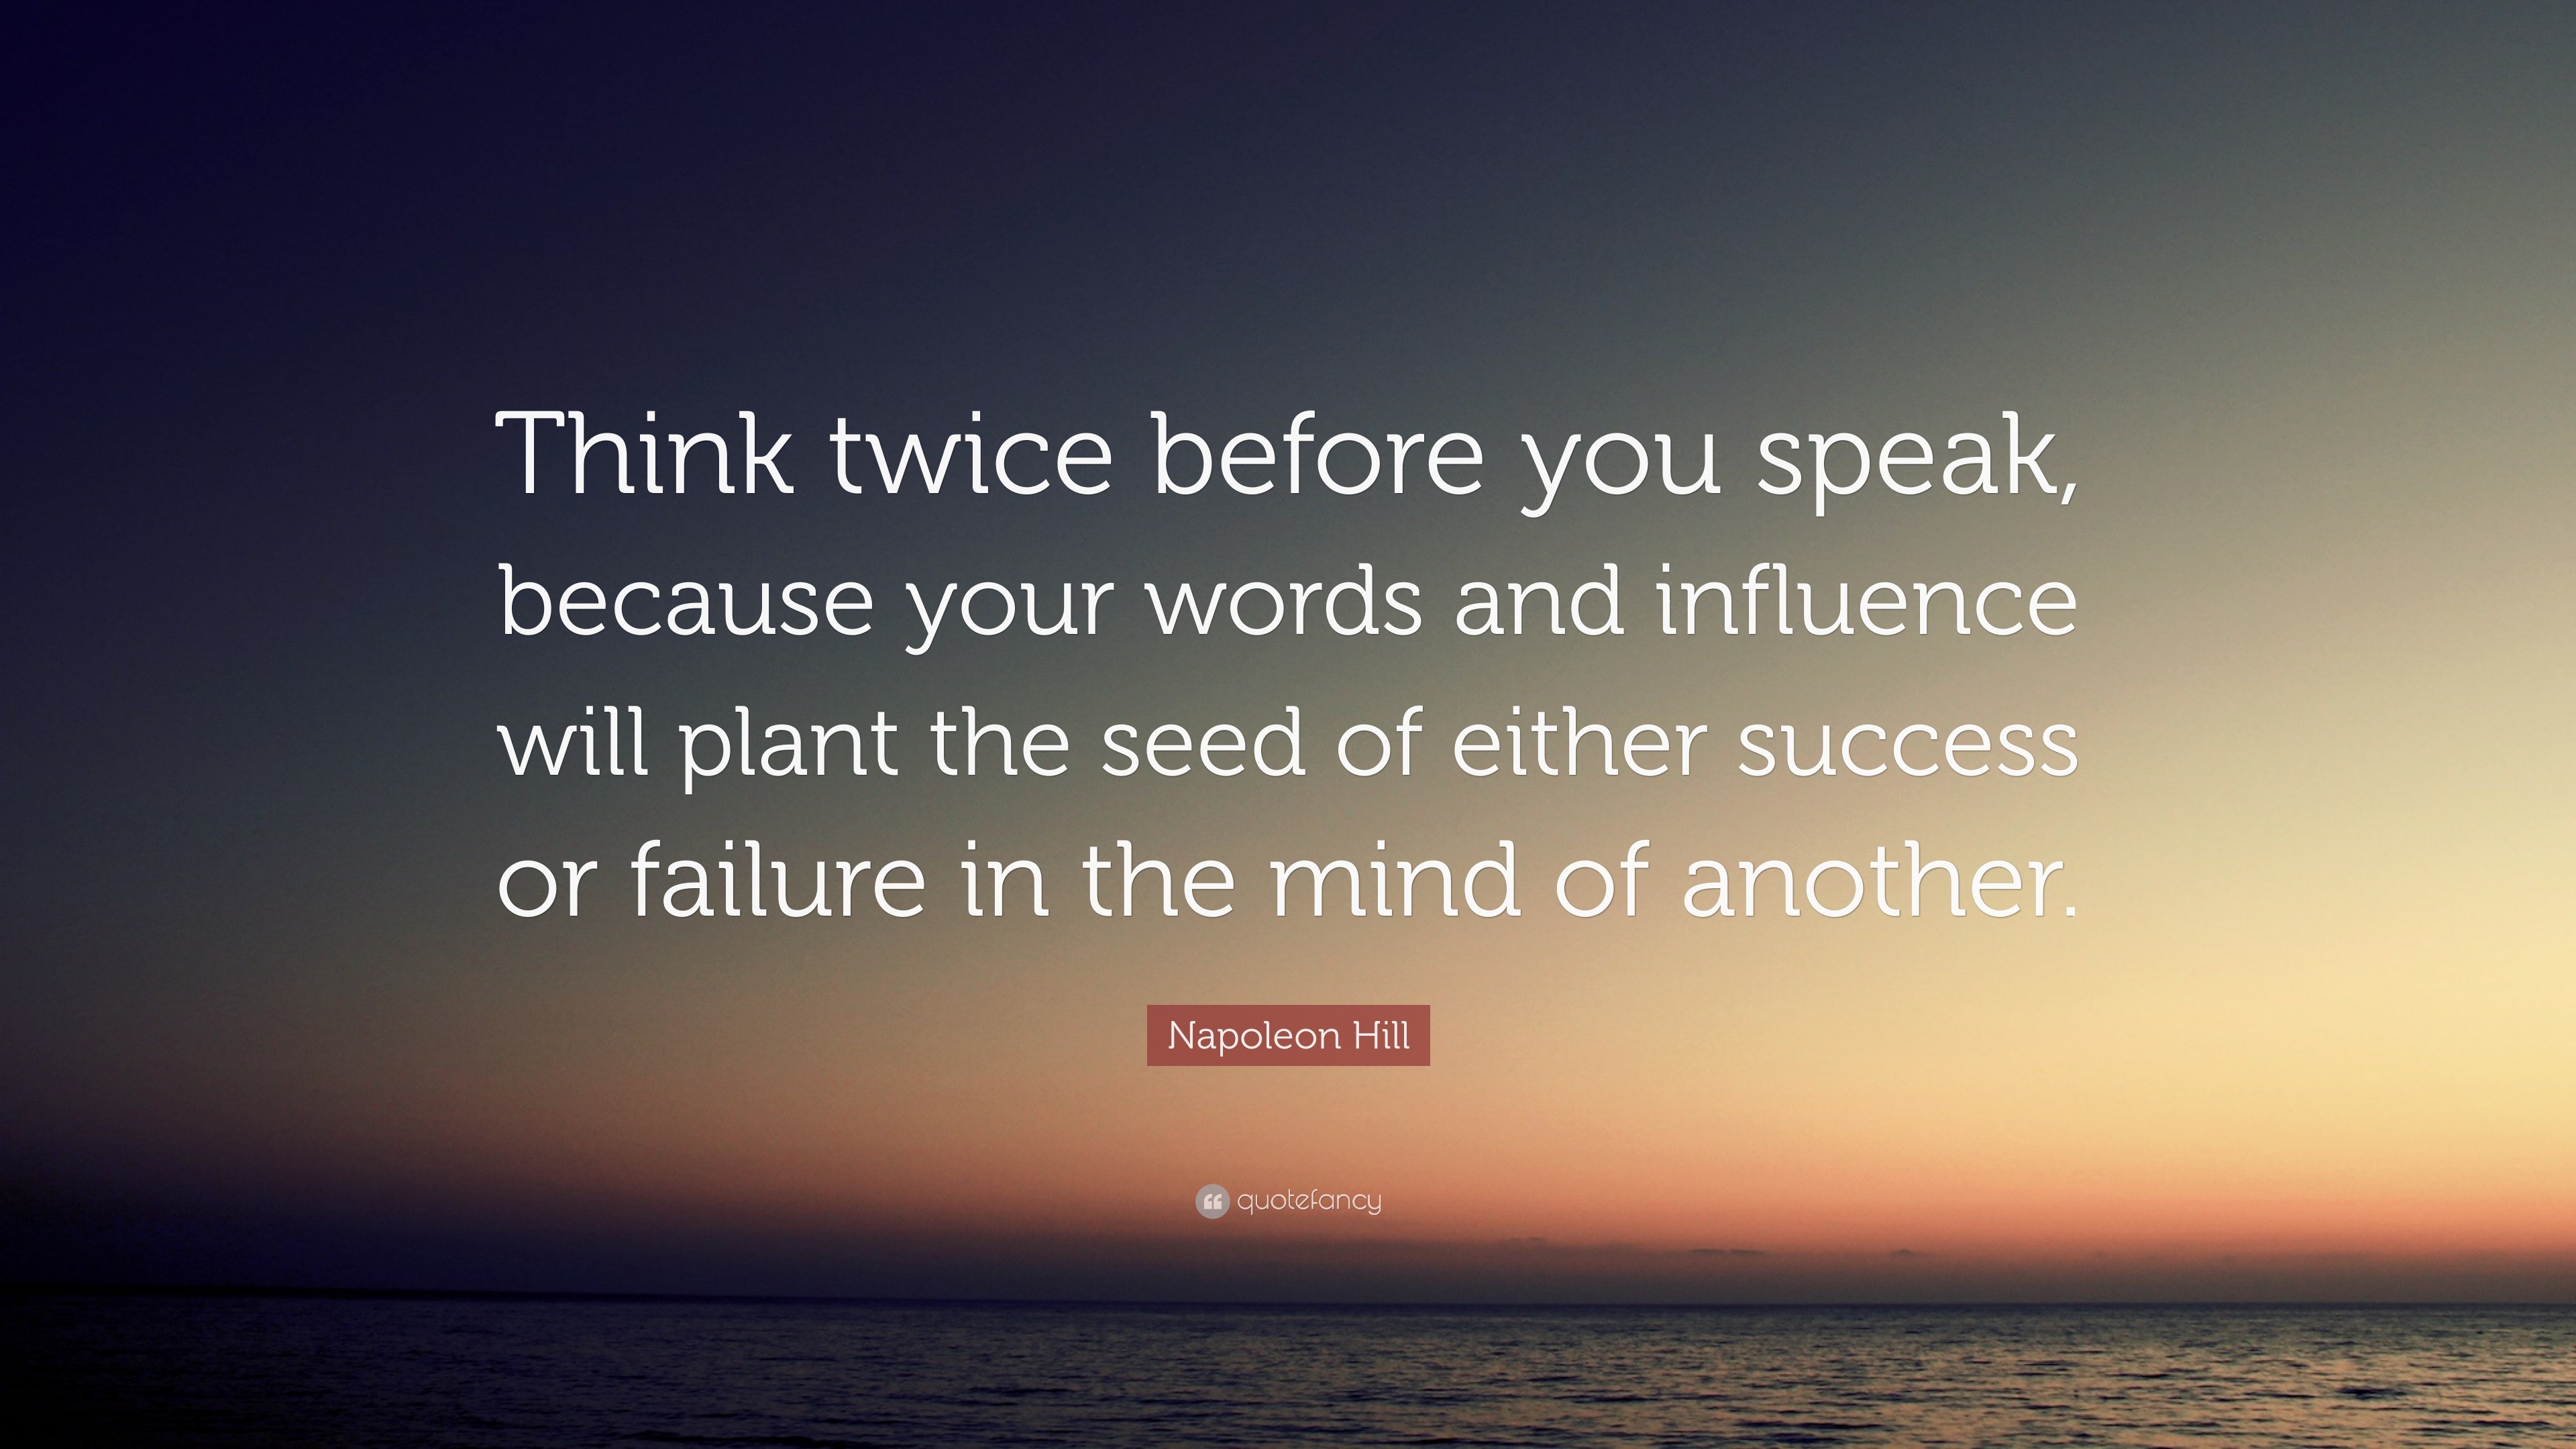 Napoleon Hill Quote: “Think Twice Before You Speak, Because Your Words And Influence Will Plant The Seed Of Either Success Or Failure In The M...”